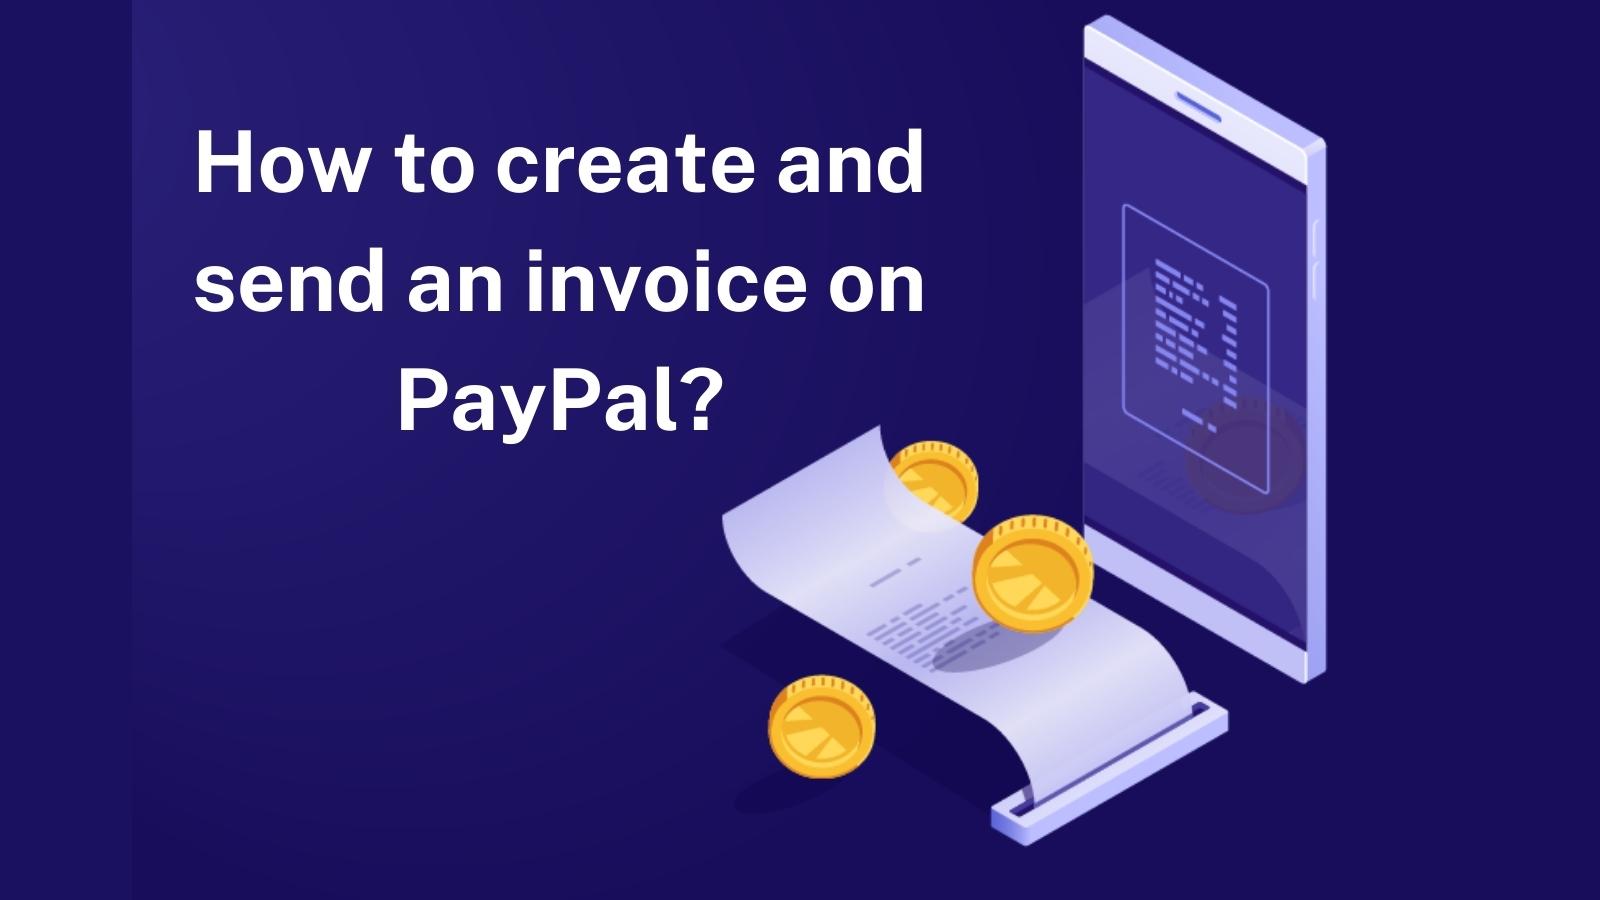 How to create and send an invoice on PayPal